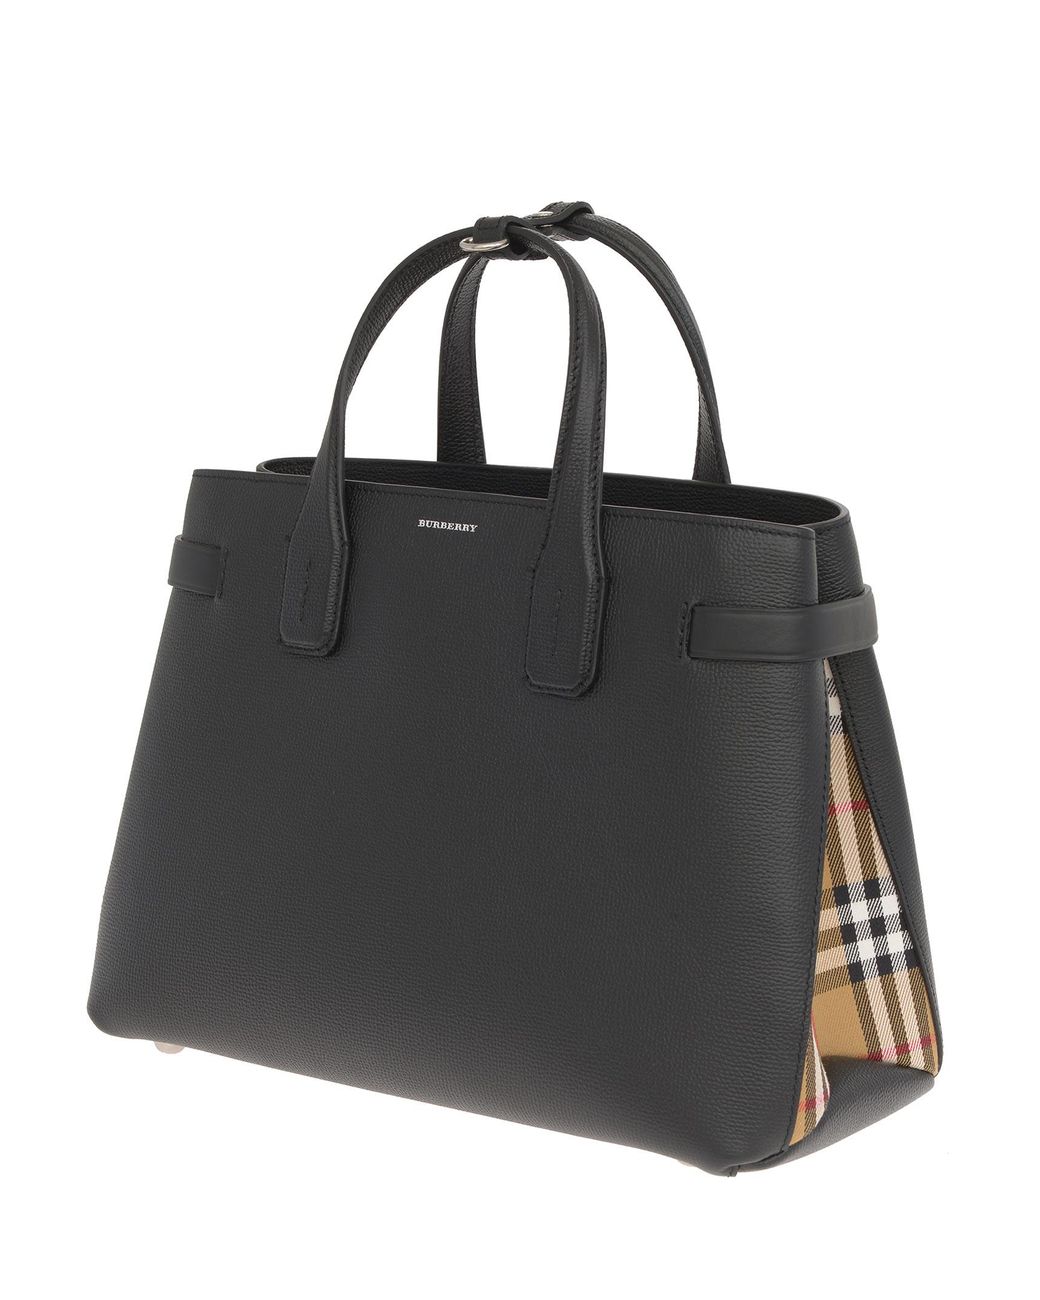 Burberry Medium Banner Shoulder Bag In Grainy Black Leather With Checkered  Side Panels. | Lyst